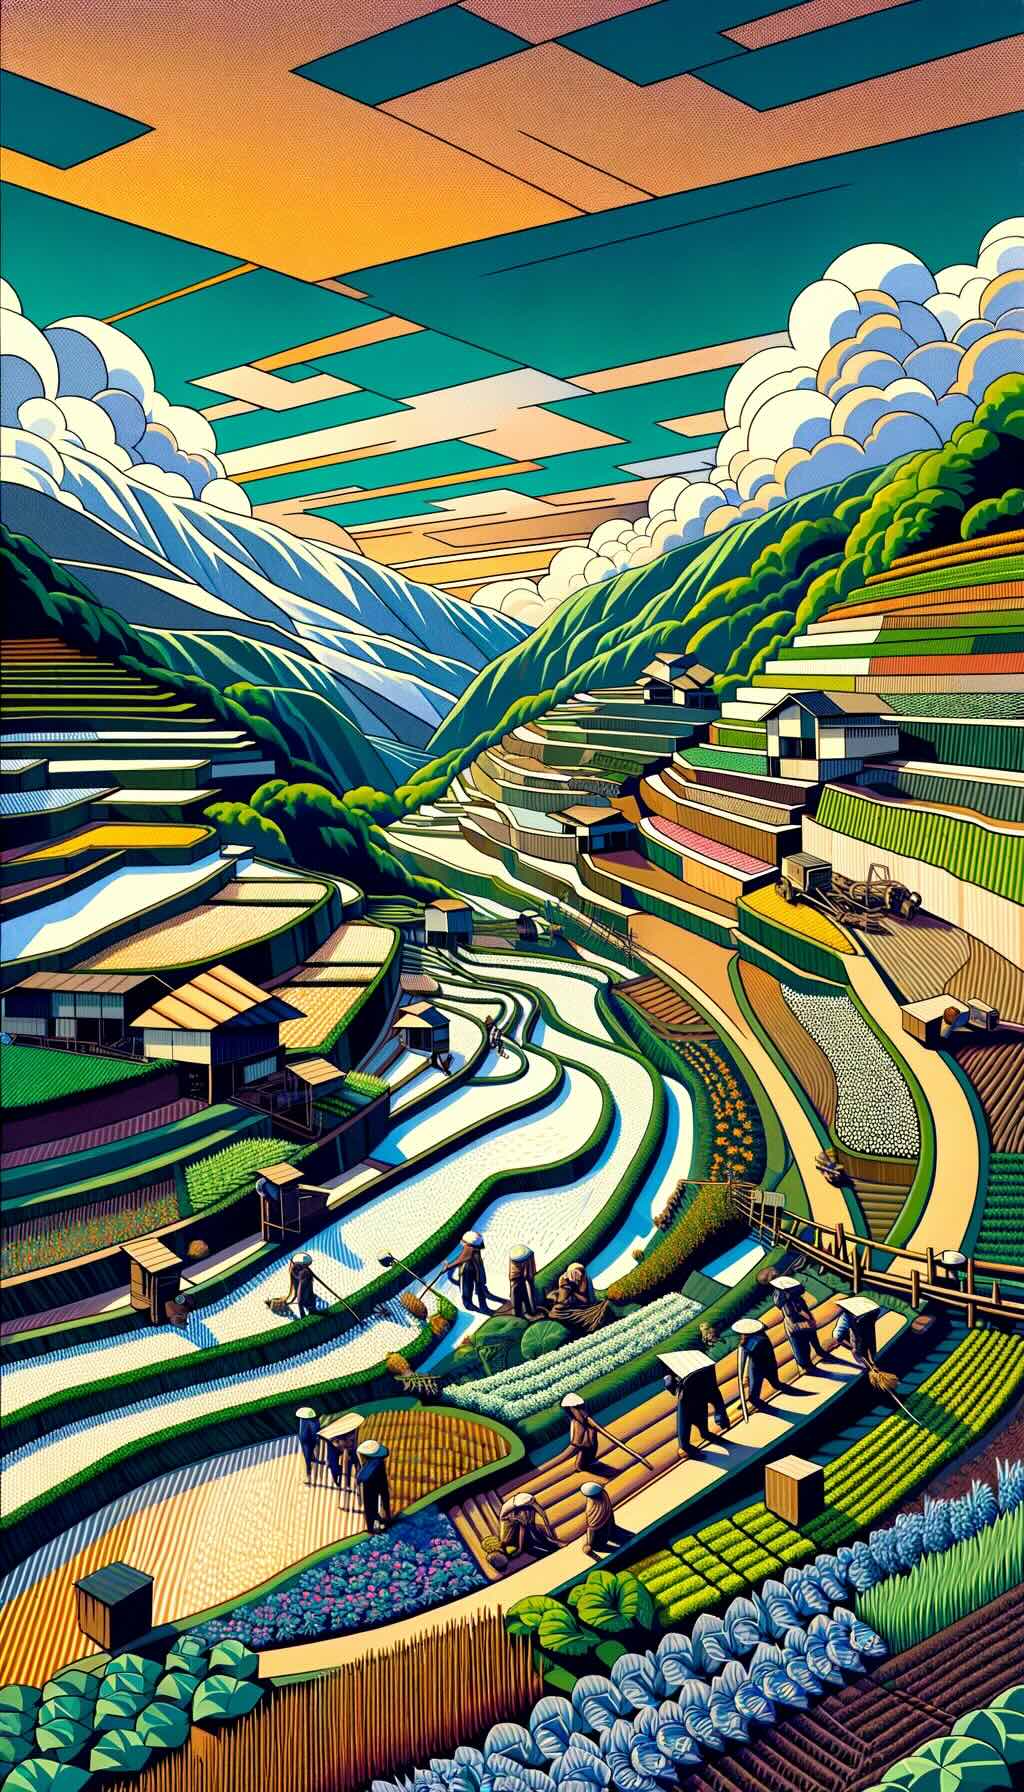 The historical background and cultural aspects of Japanese farming.